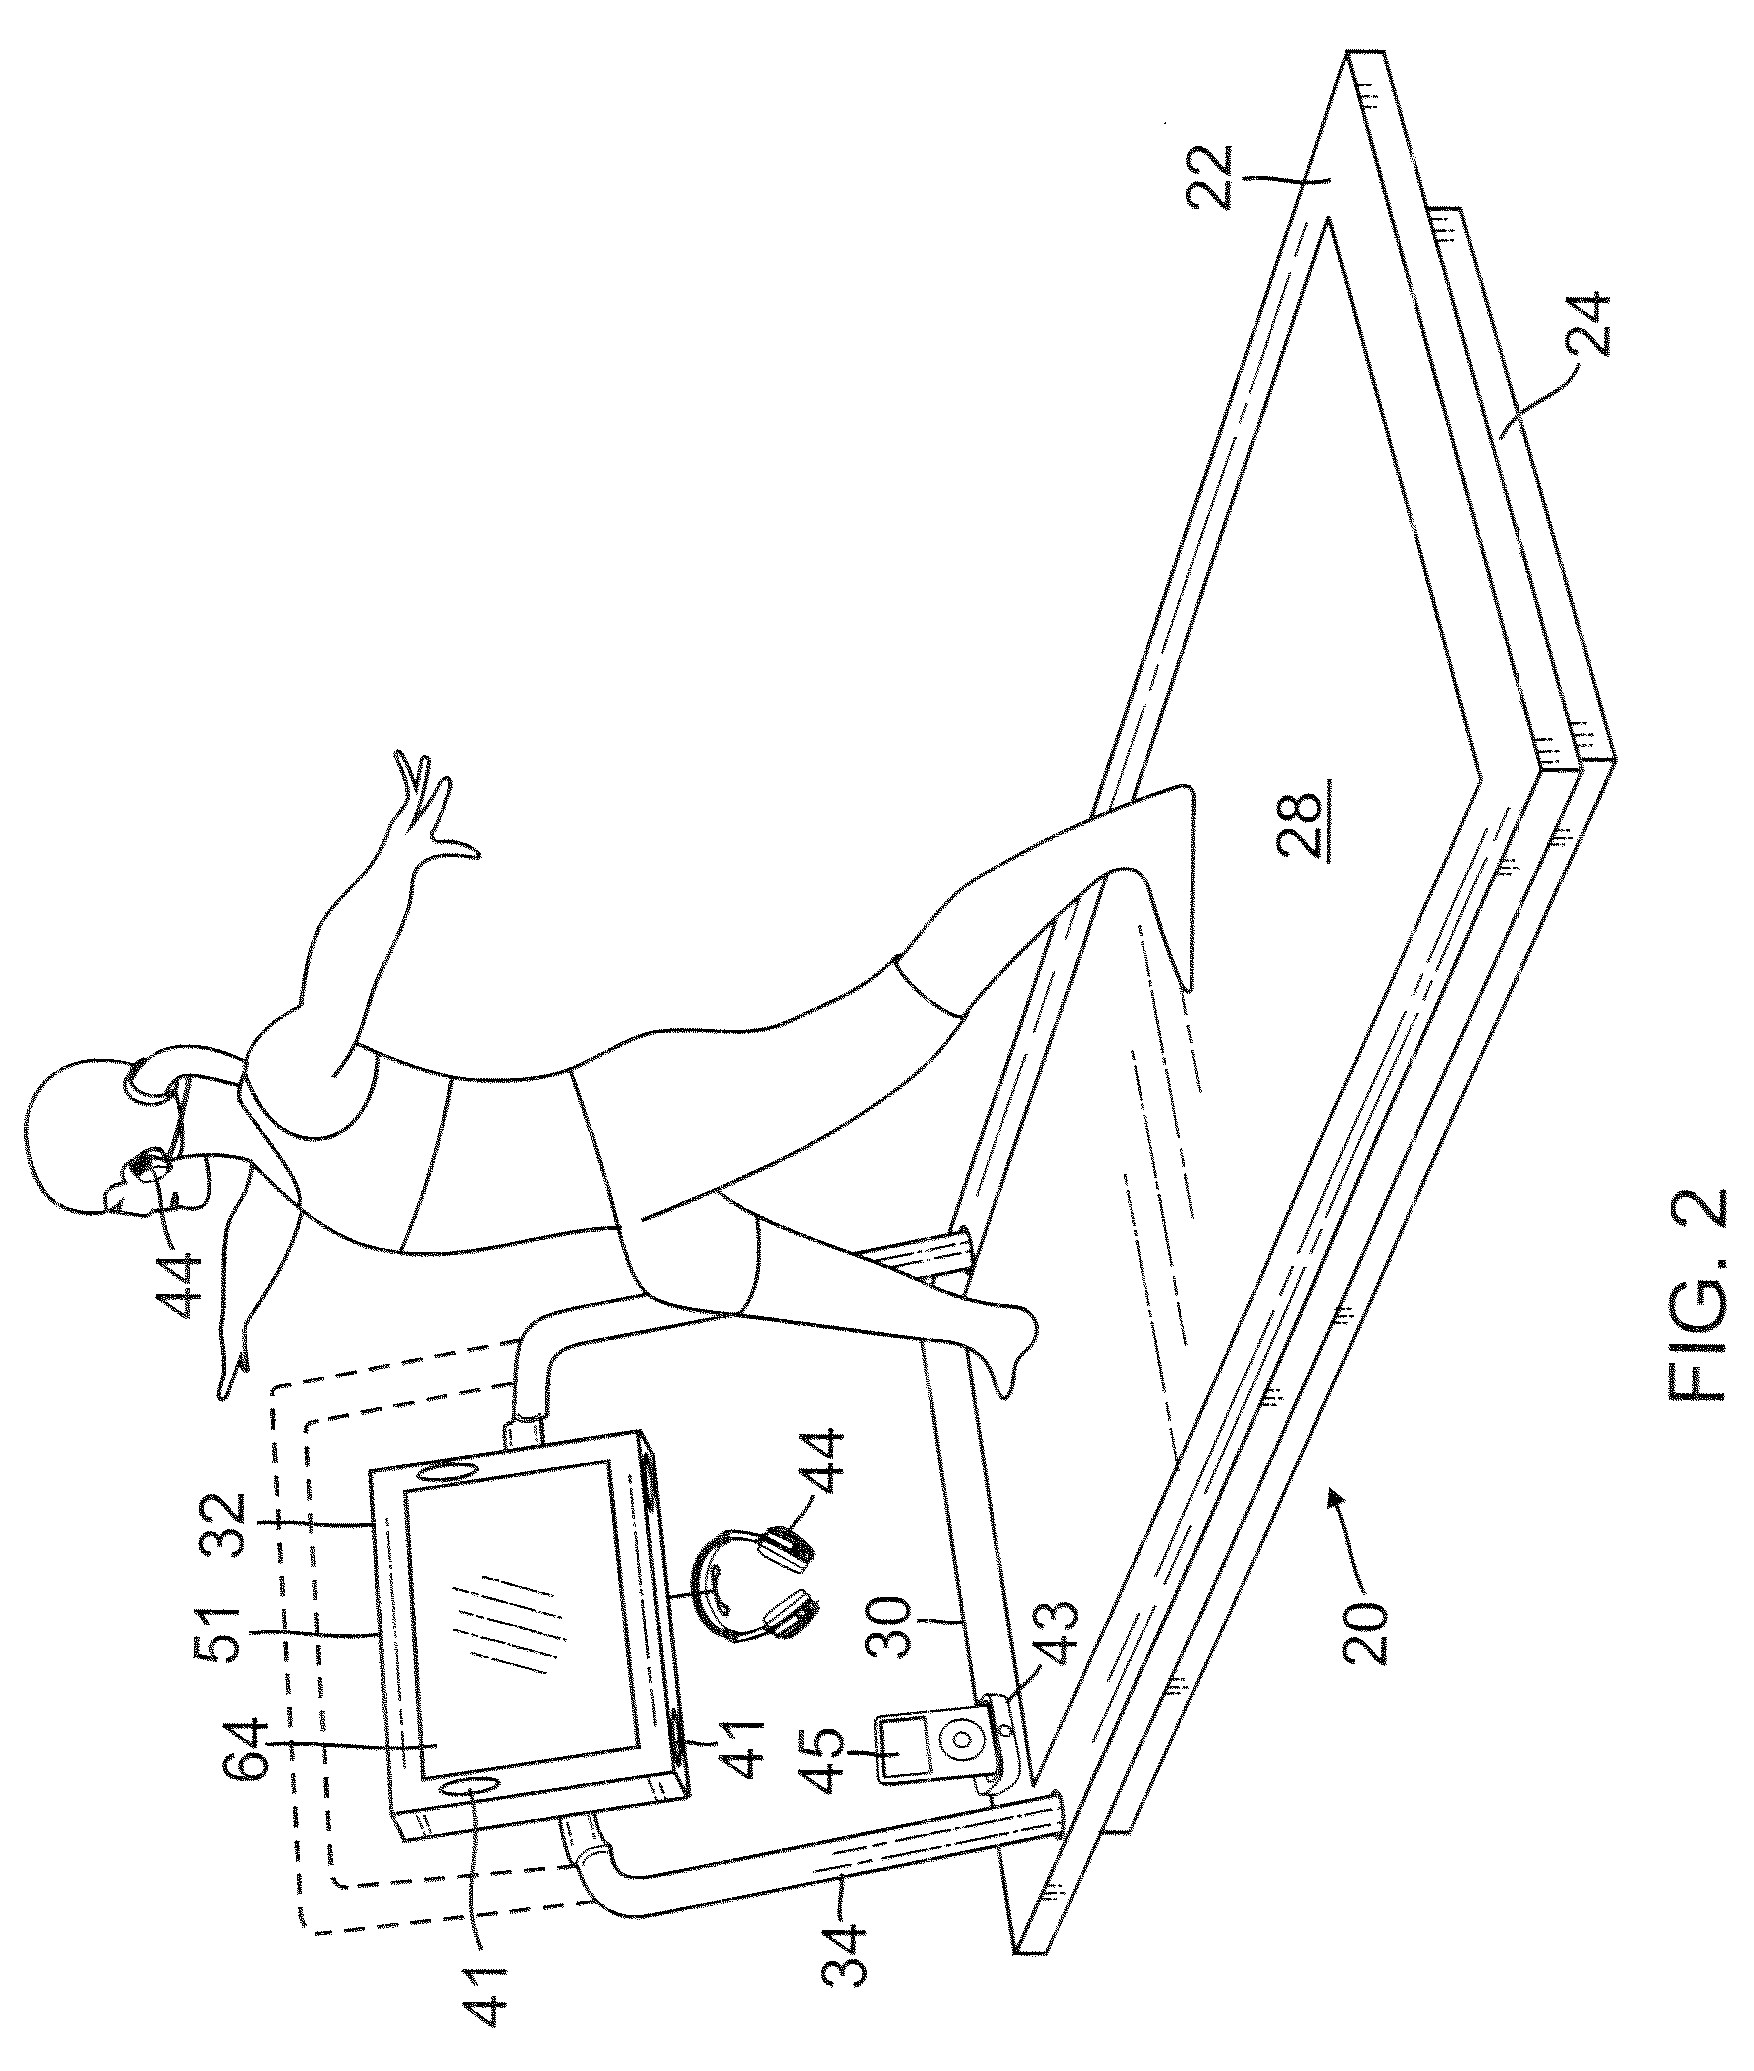 Exercise apparatus and methods